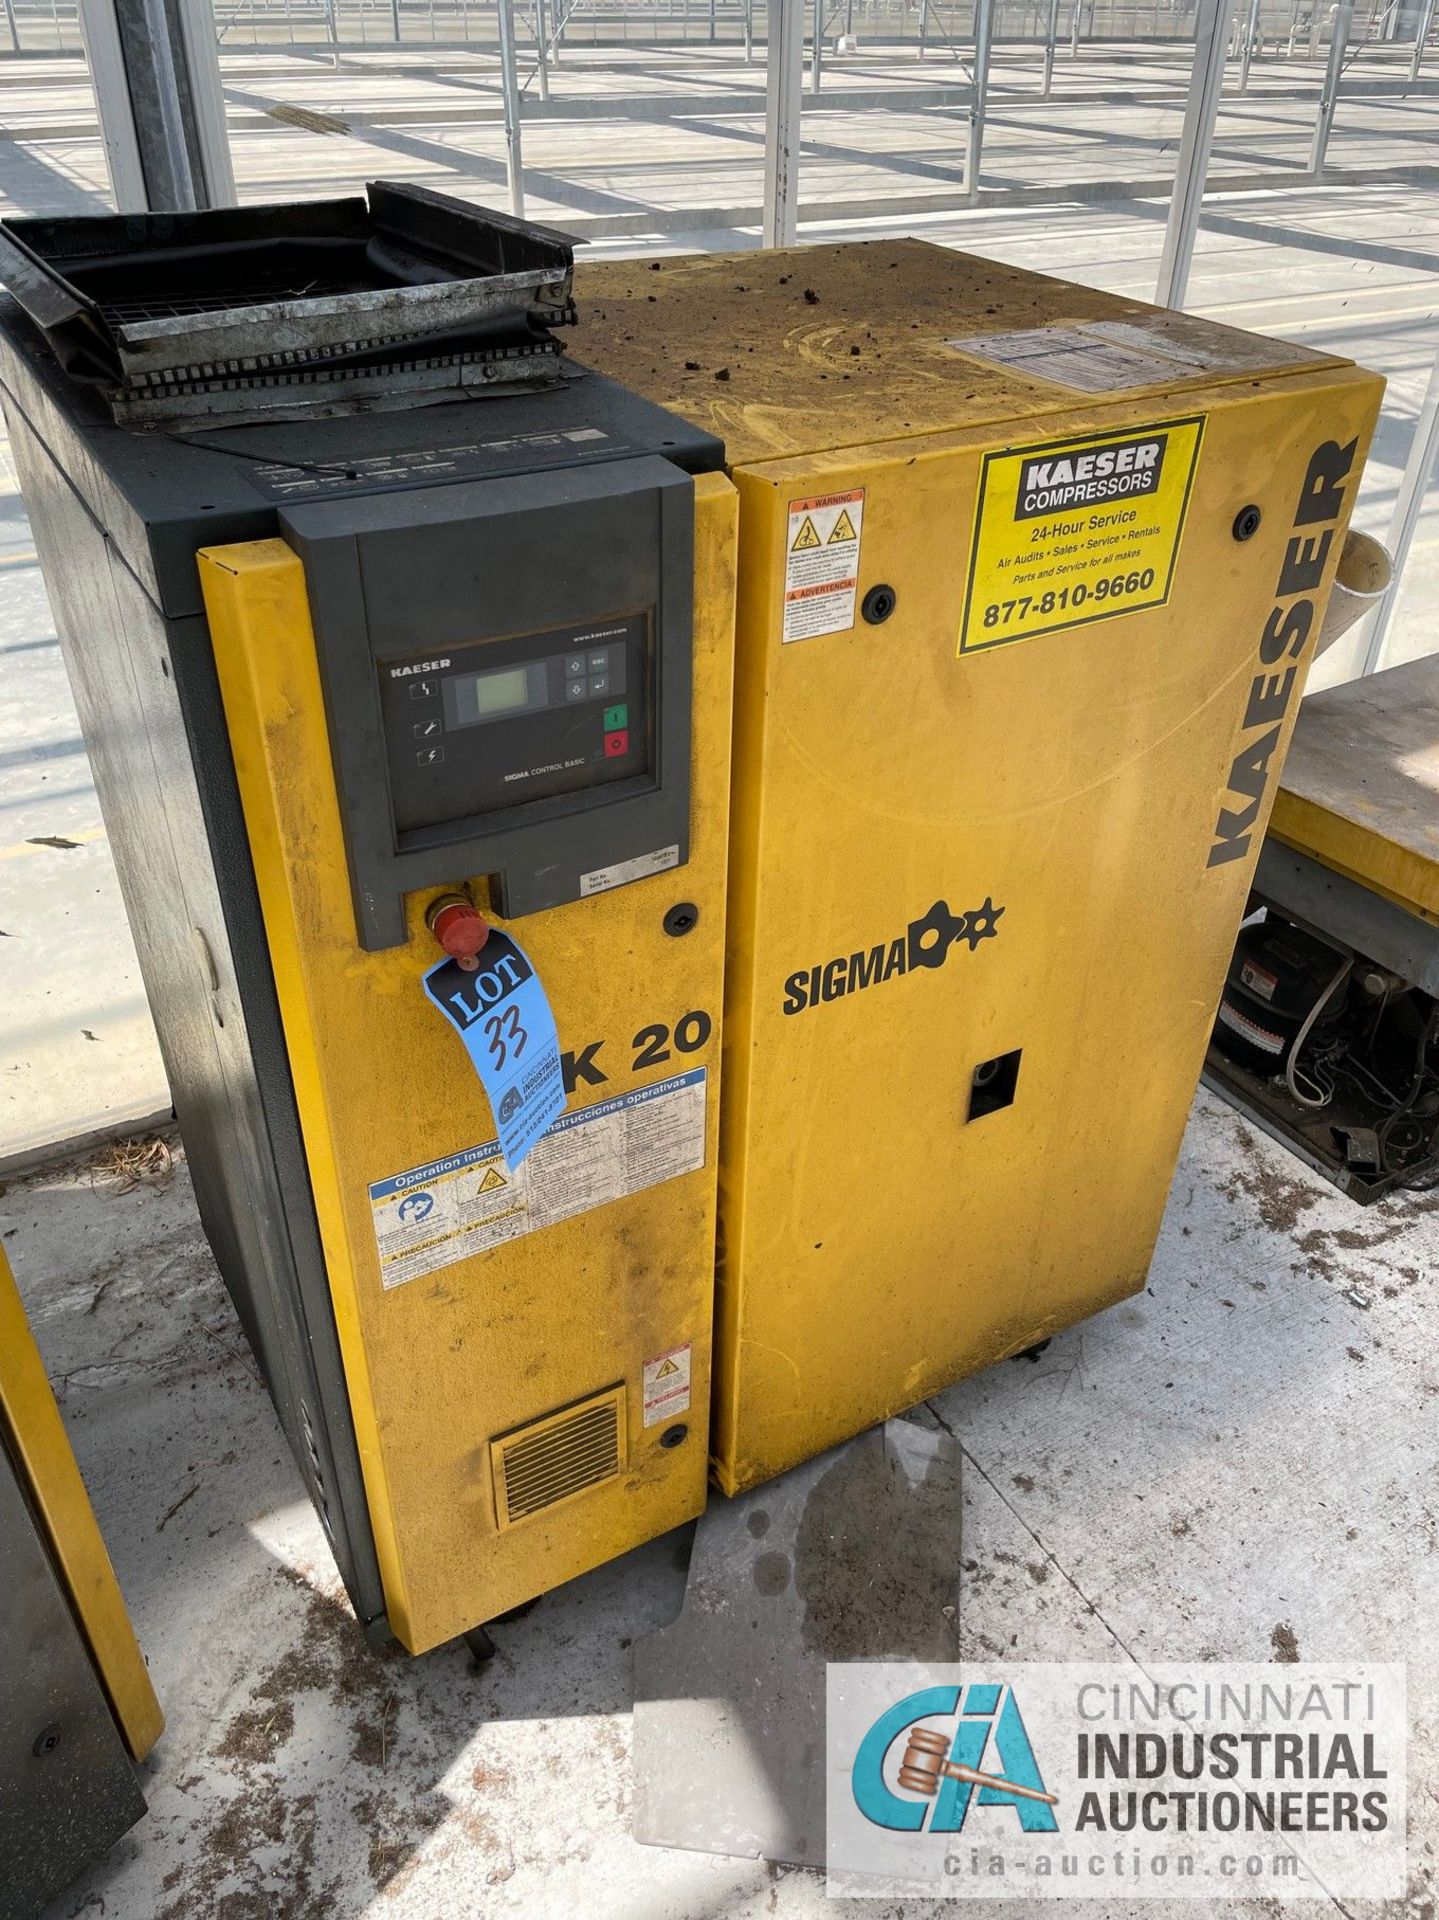 20 HP KAESER MODEL SK-20 AIR COMPRESSOR; S/N 1371 (NEW 2008), CONDITION UNKNOWN, WAS IN PLACE HOOKED